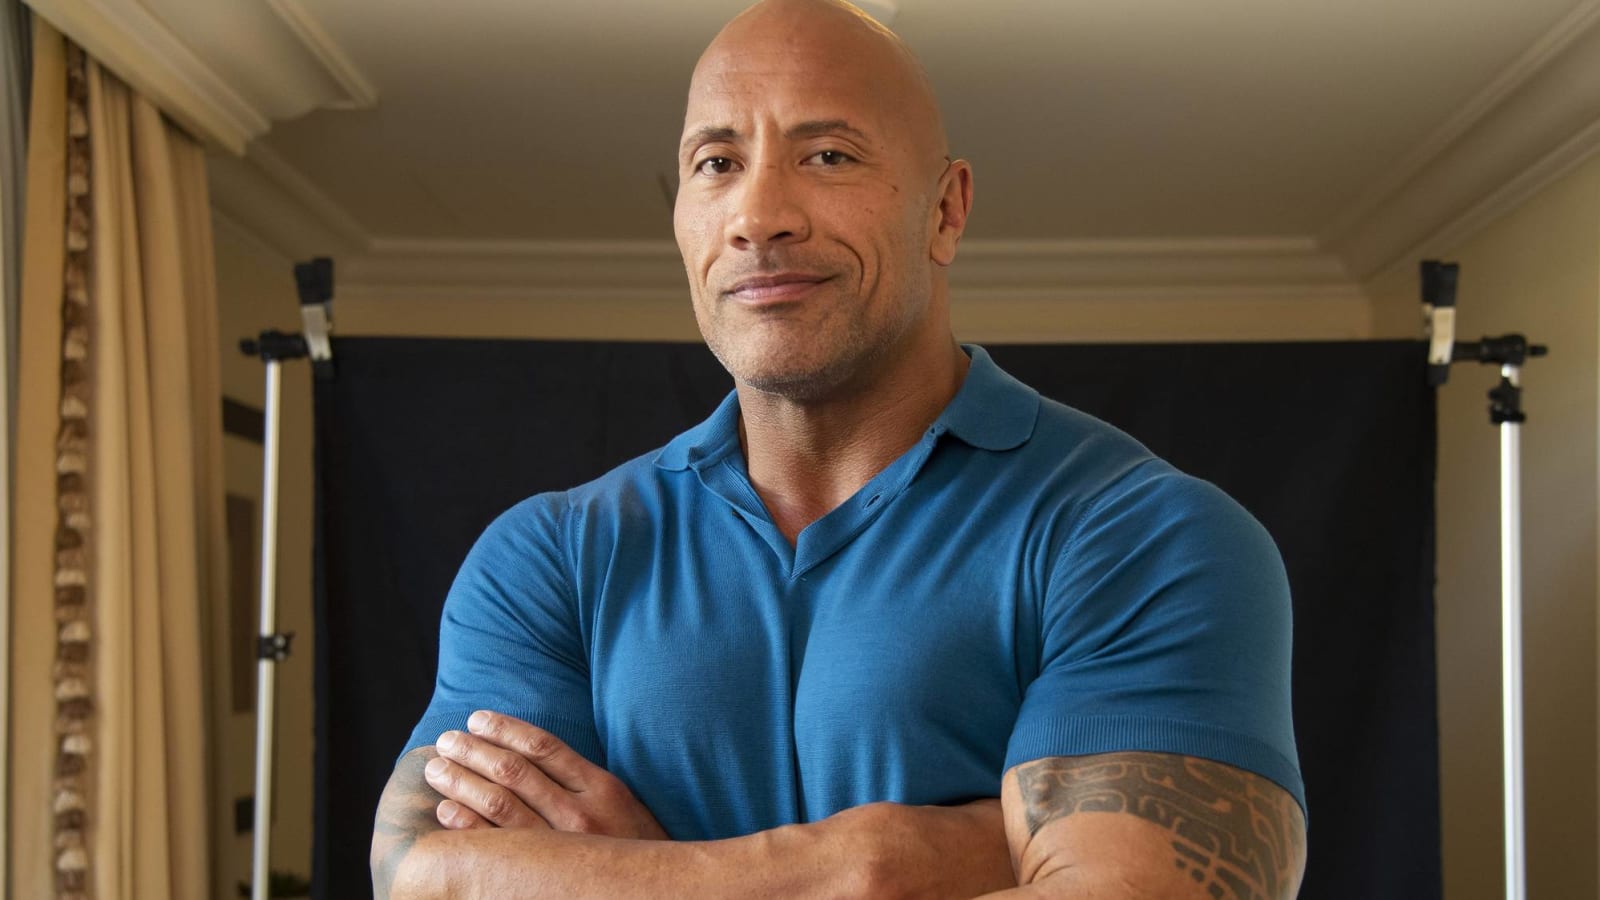 The Rock says he, his family have recovered from COVID-19